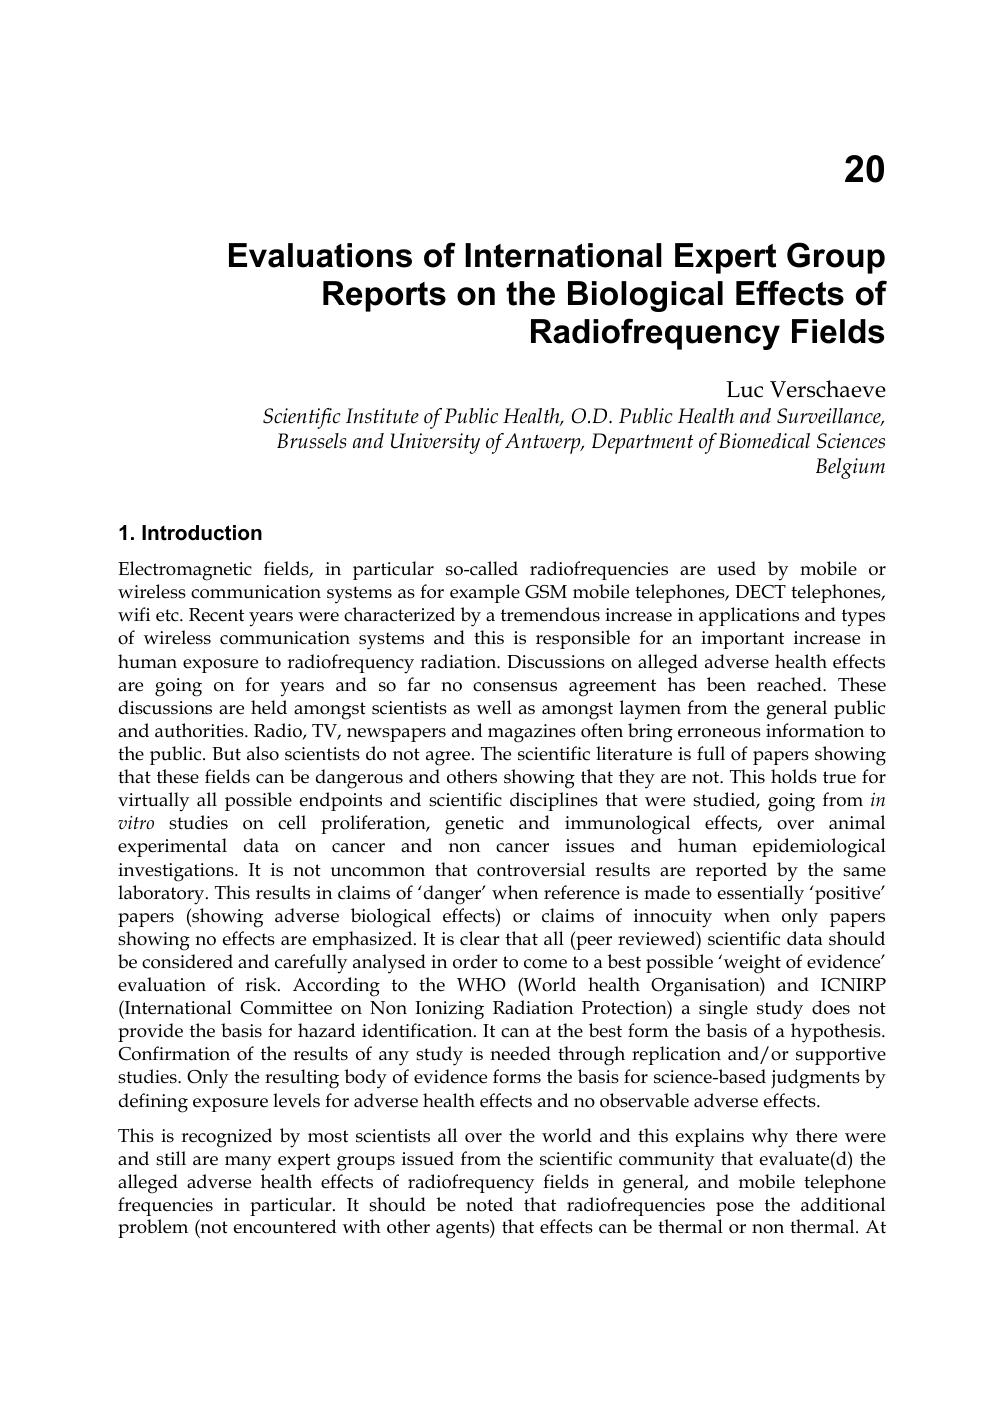 Evaluations of International Expert Group Reports on the Biological Effects of Radiofrequency Fields